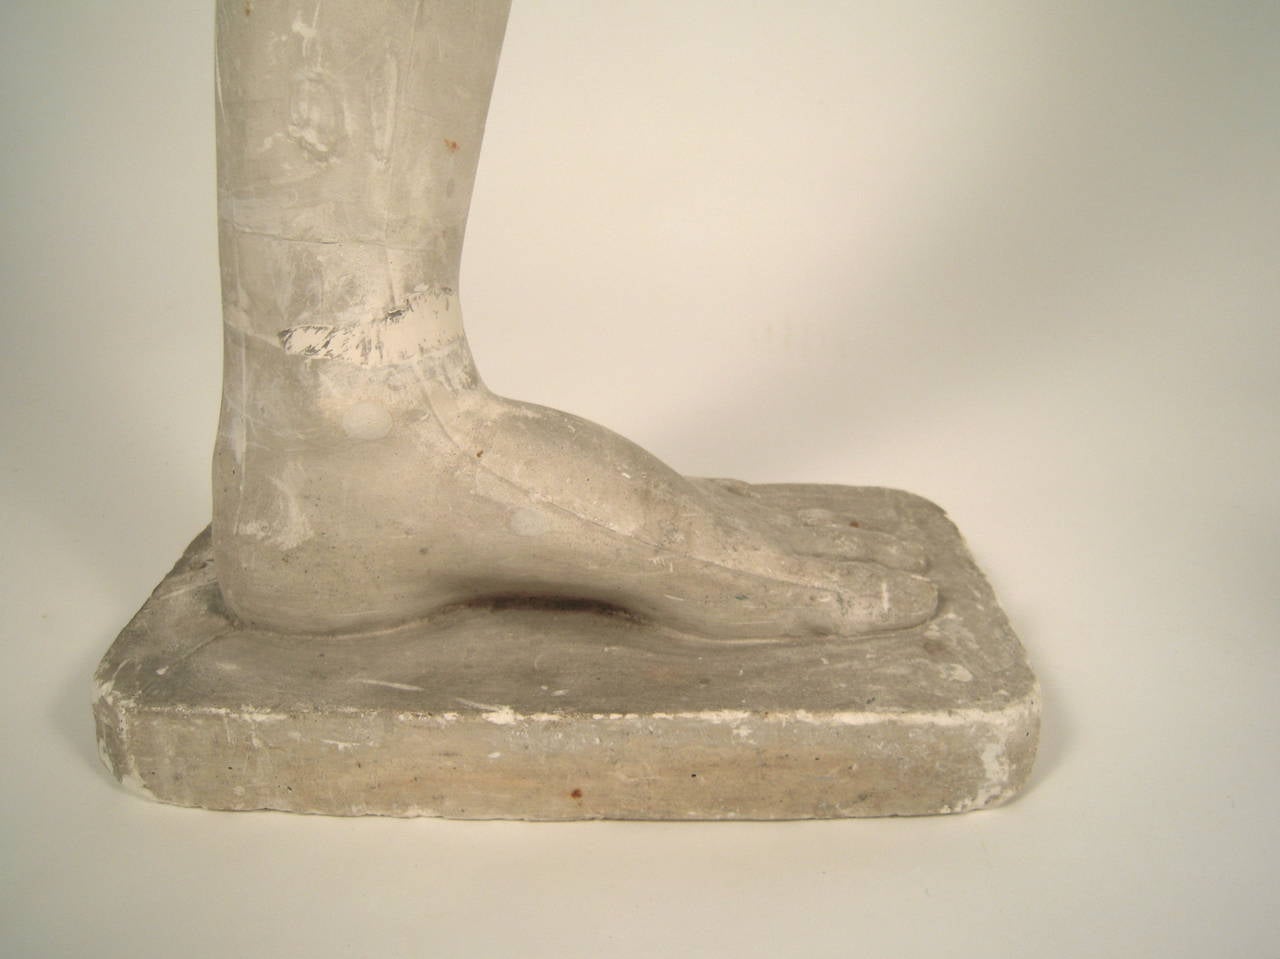 American Neoclassical Style Grand Tour Plaster Leg and Foot Sculpture